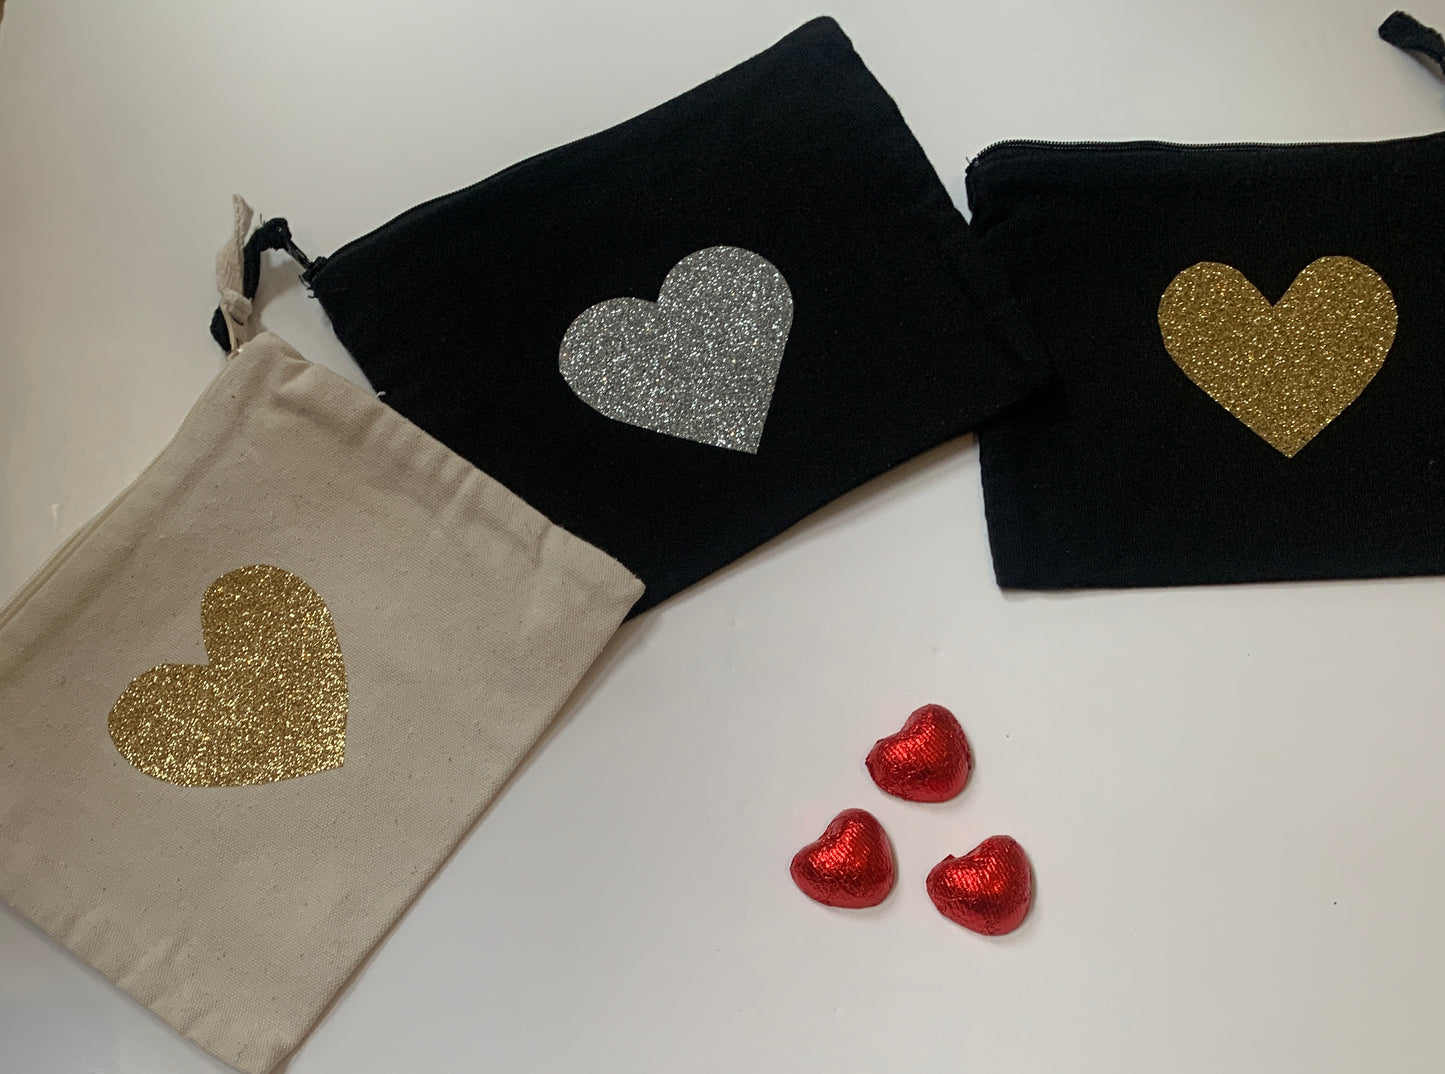 Jimmy Purse Bags with Hearts